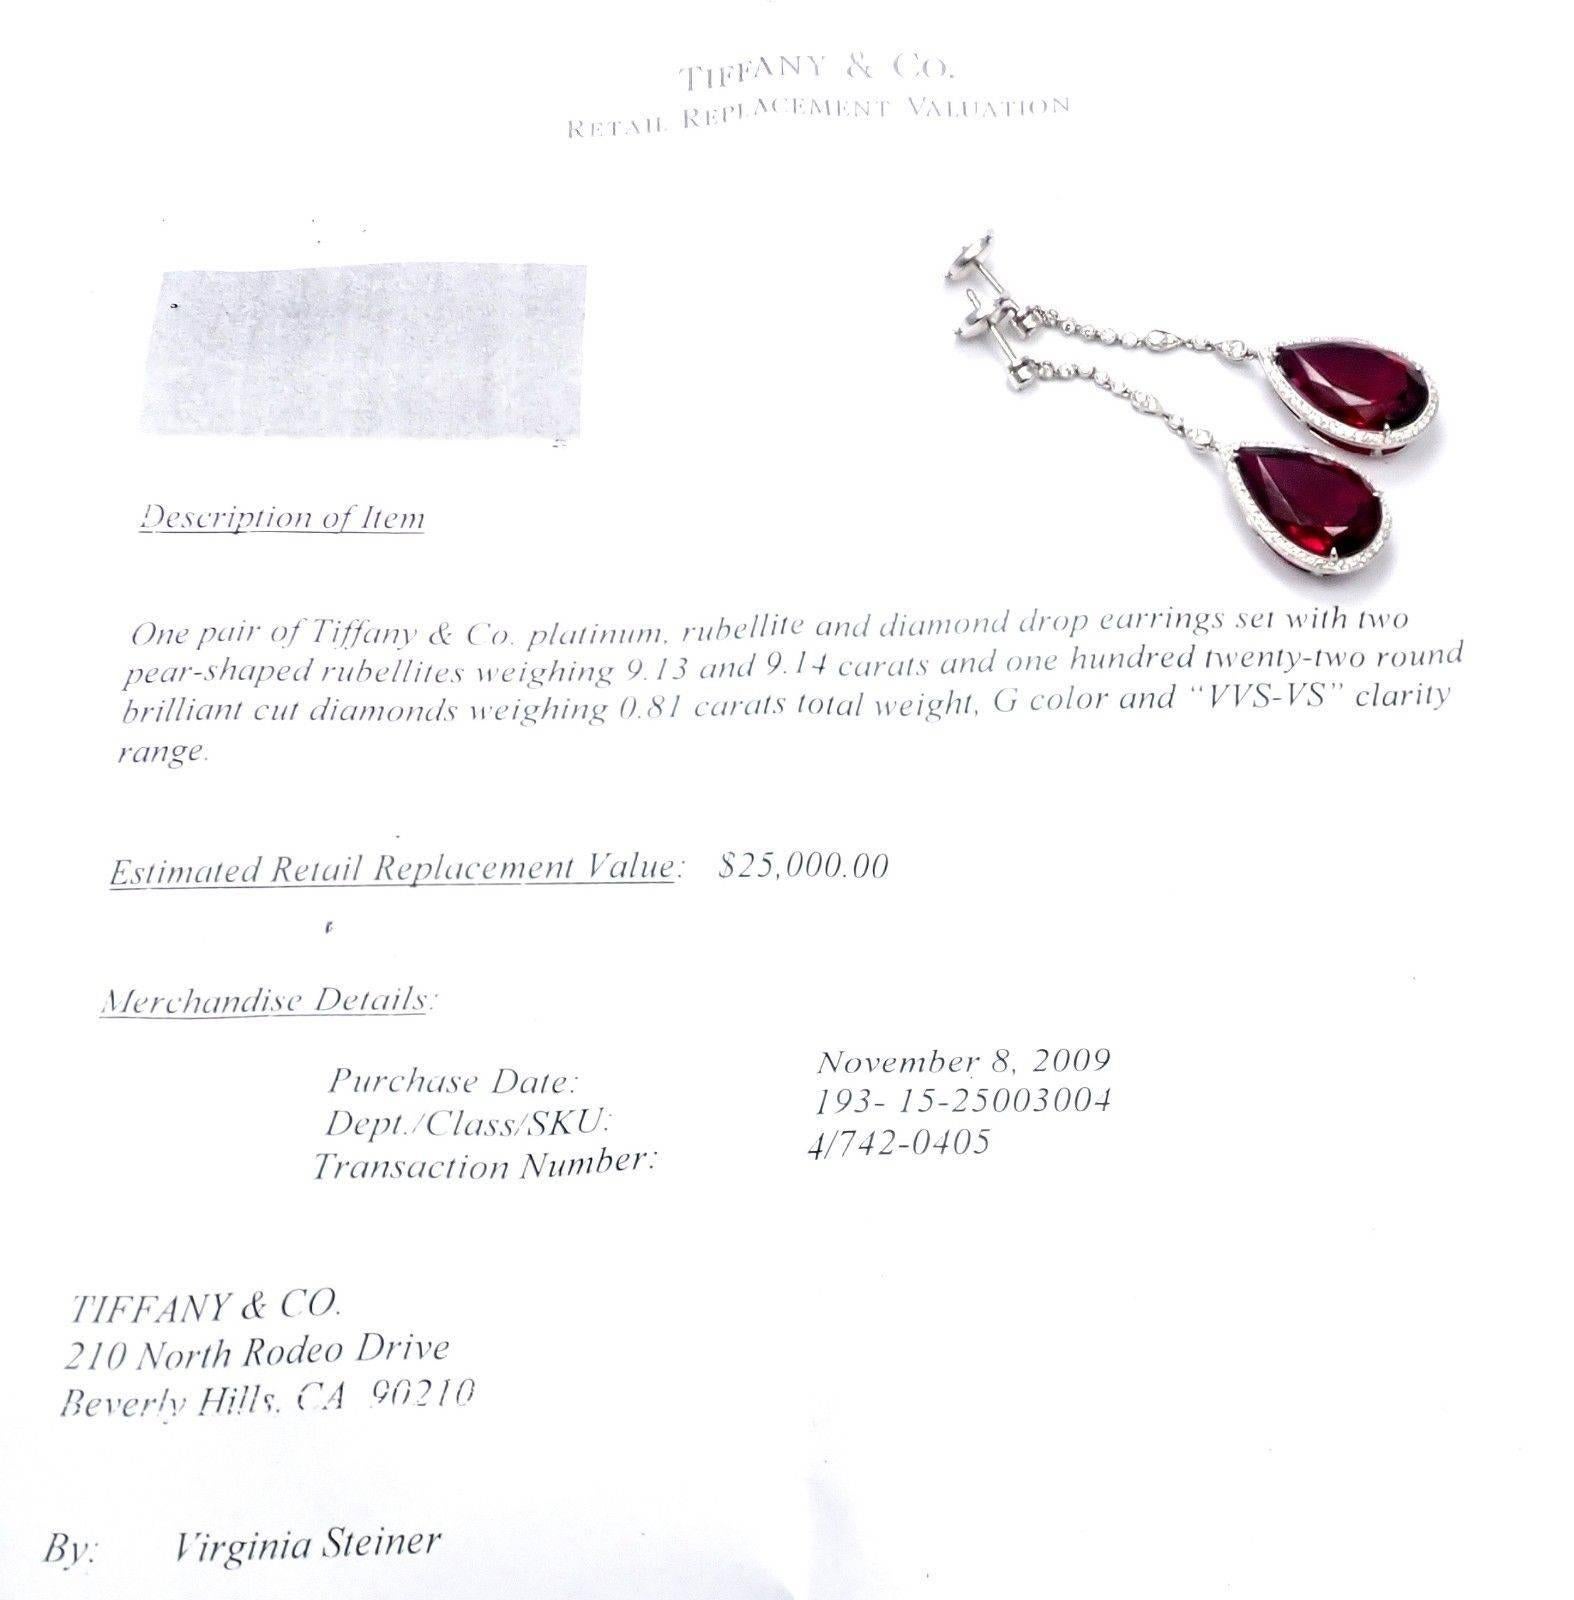 Platinum Diamond Large Rubellite Drop Earrings by Tiffany & Co. 
With 122 round brilliant cut diamonds VVS-VS clarity, G color total weght approx. .81ct
2 pear shape rubellite 9.13ct and 9.14ct
These earrings come with Tiffany & Co Box and a